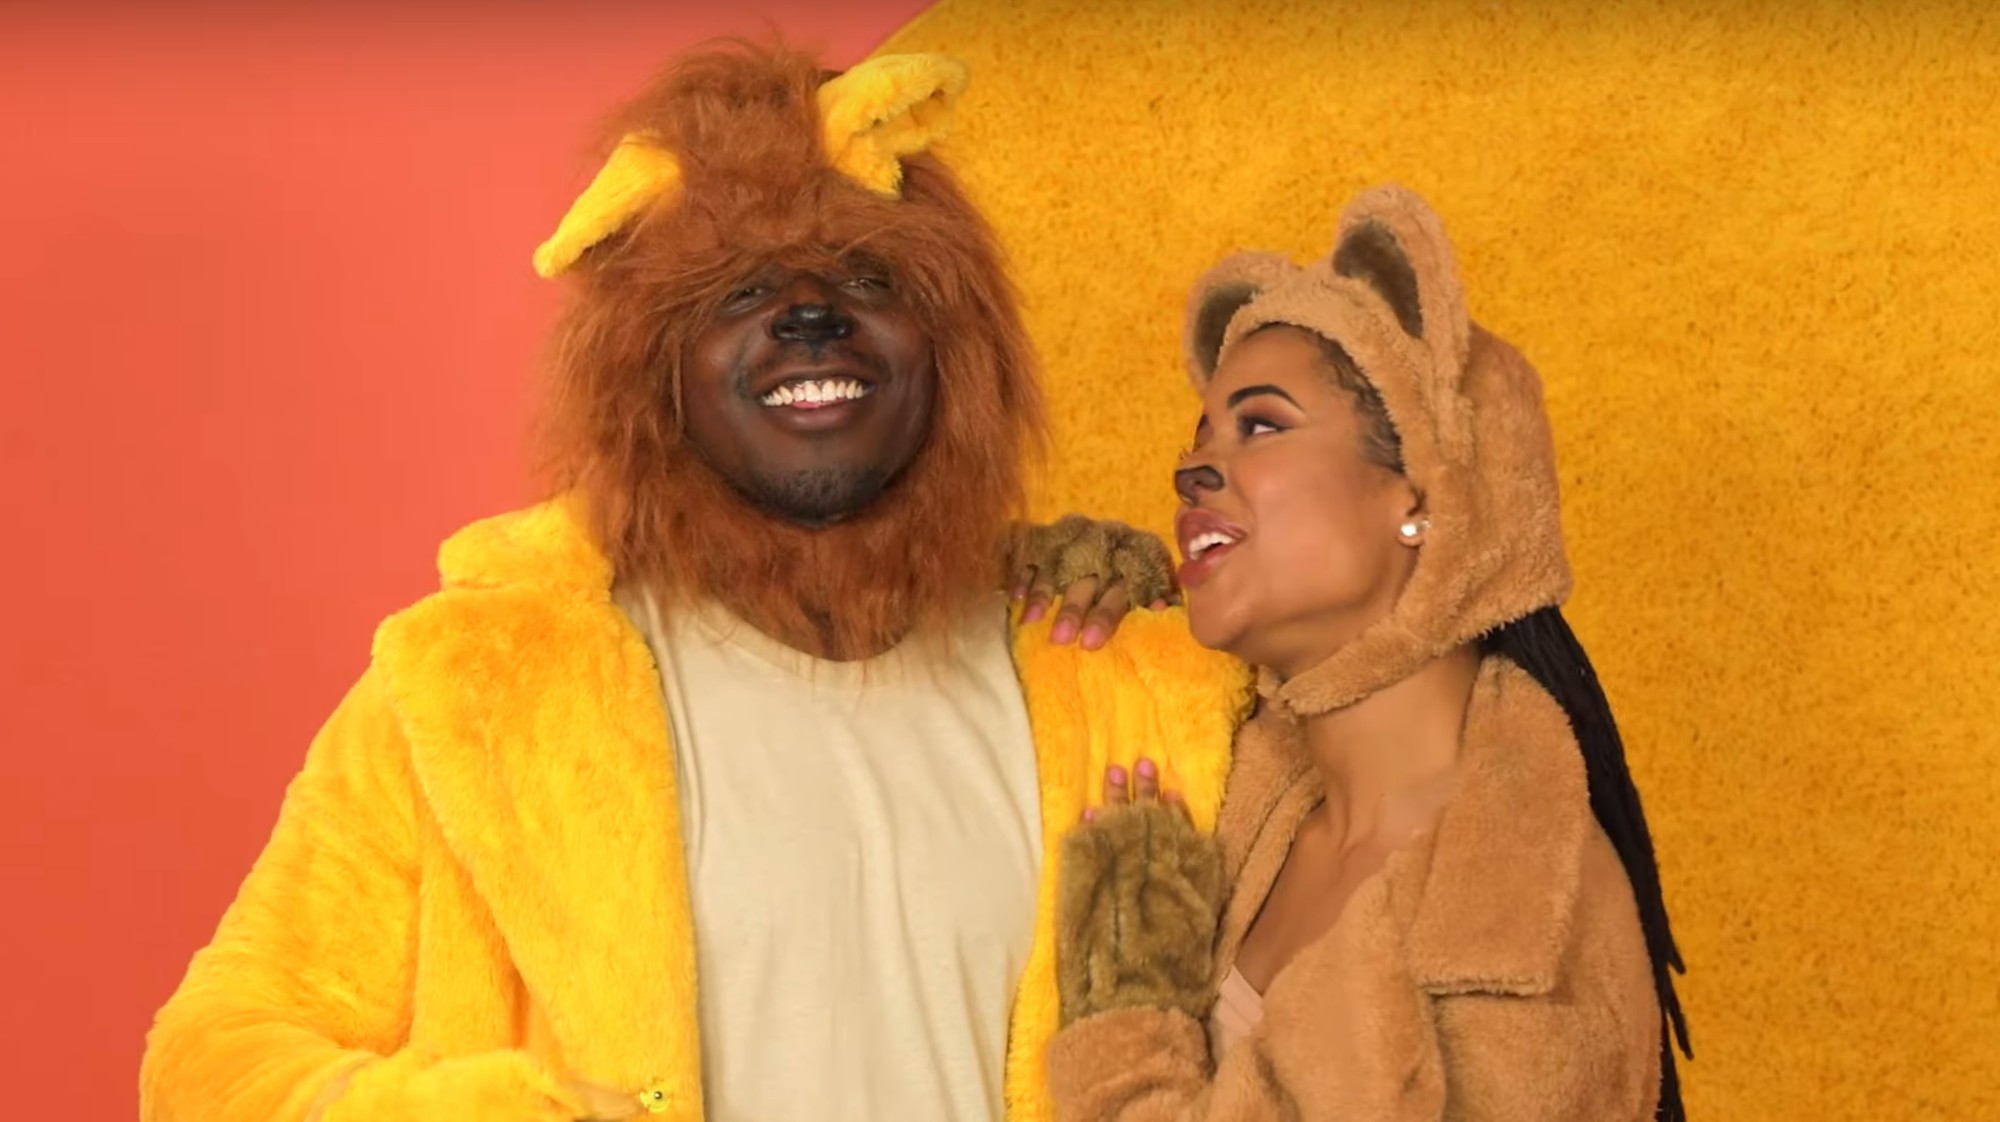 Lion King Porn - A 'Lion King' Porn Parody Exists and We Can Feel the Love - VICE